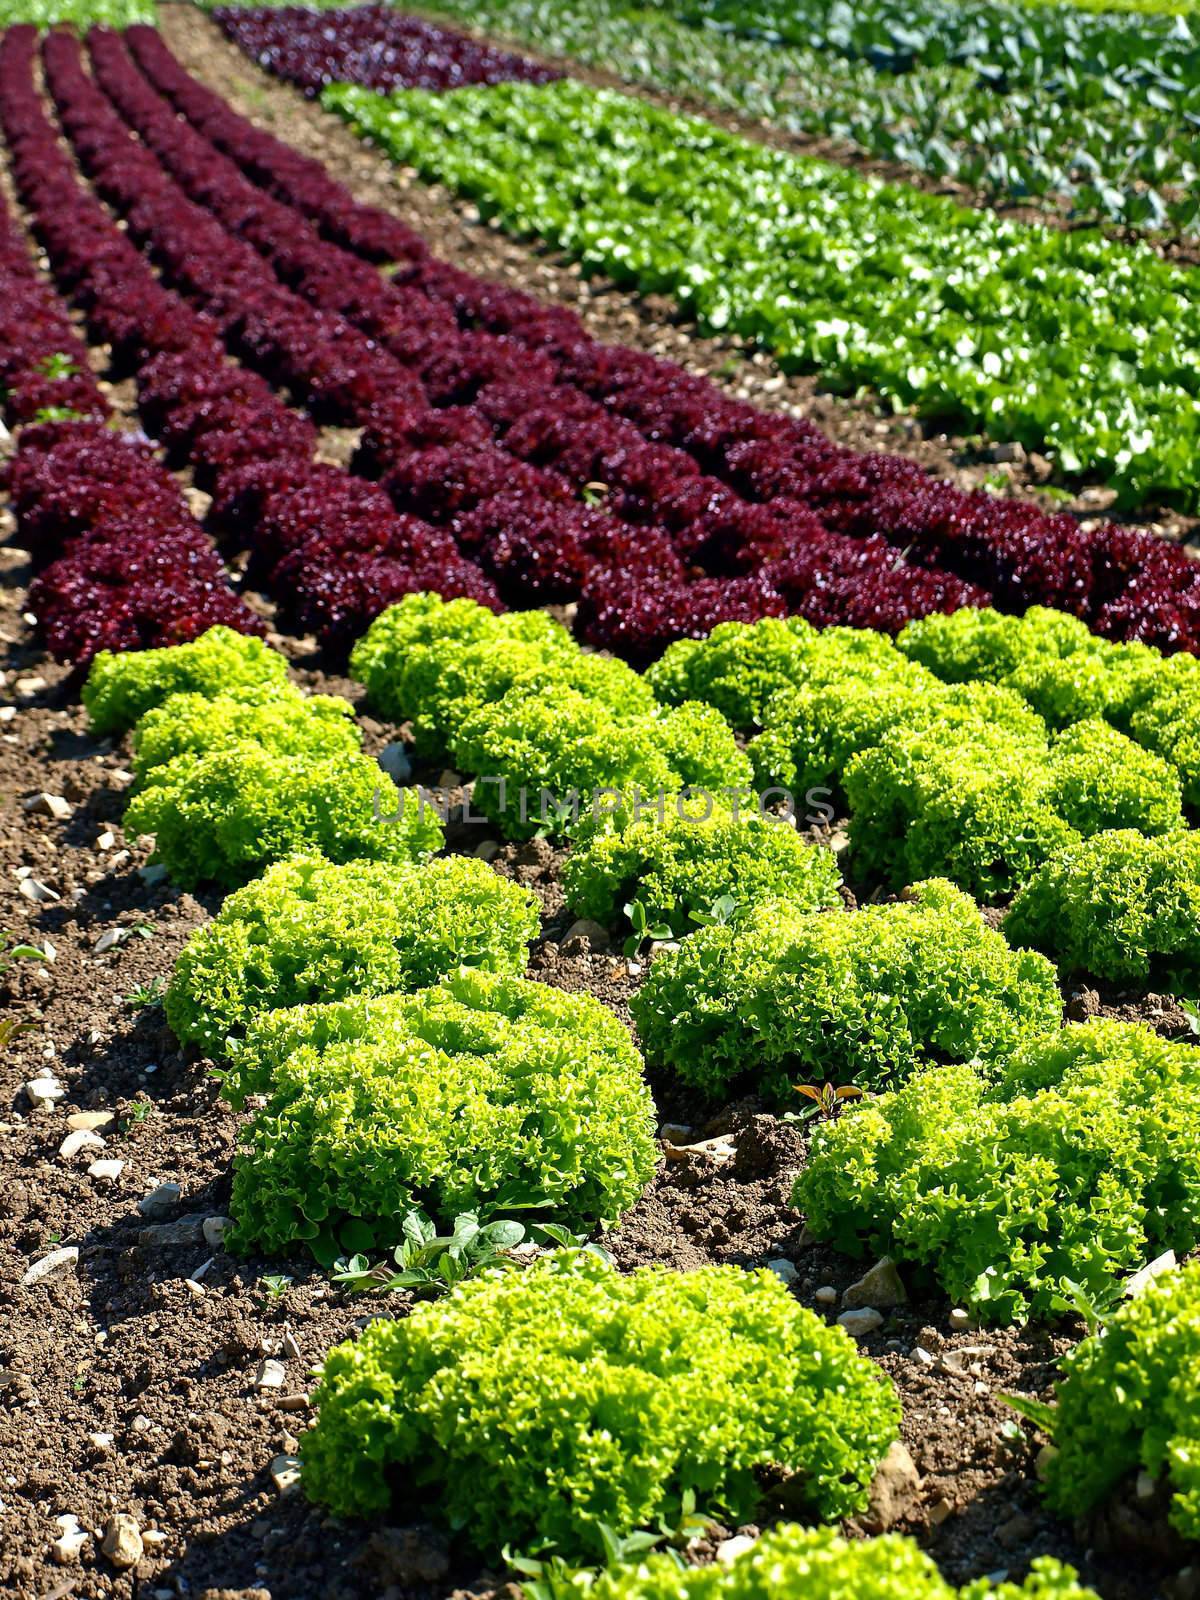 cultivation of salad and vegetables